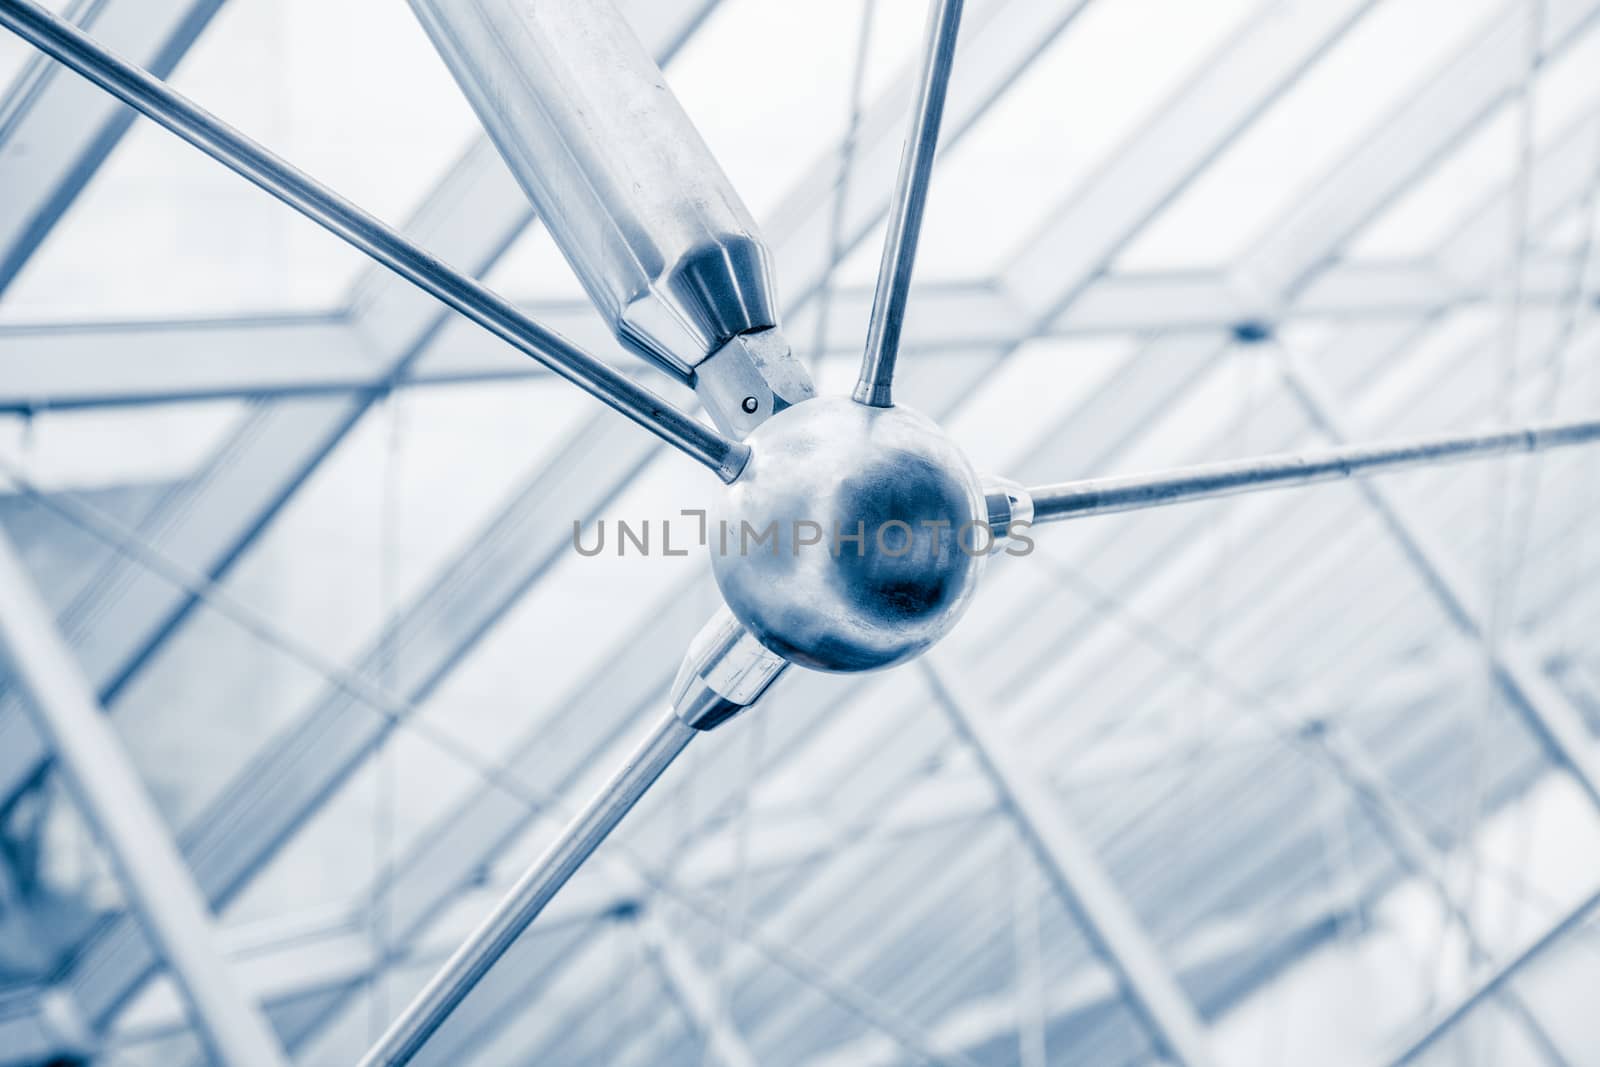 Modern Architectural Skylight Structure Details from Indoor a Building